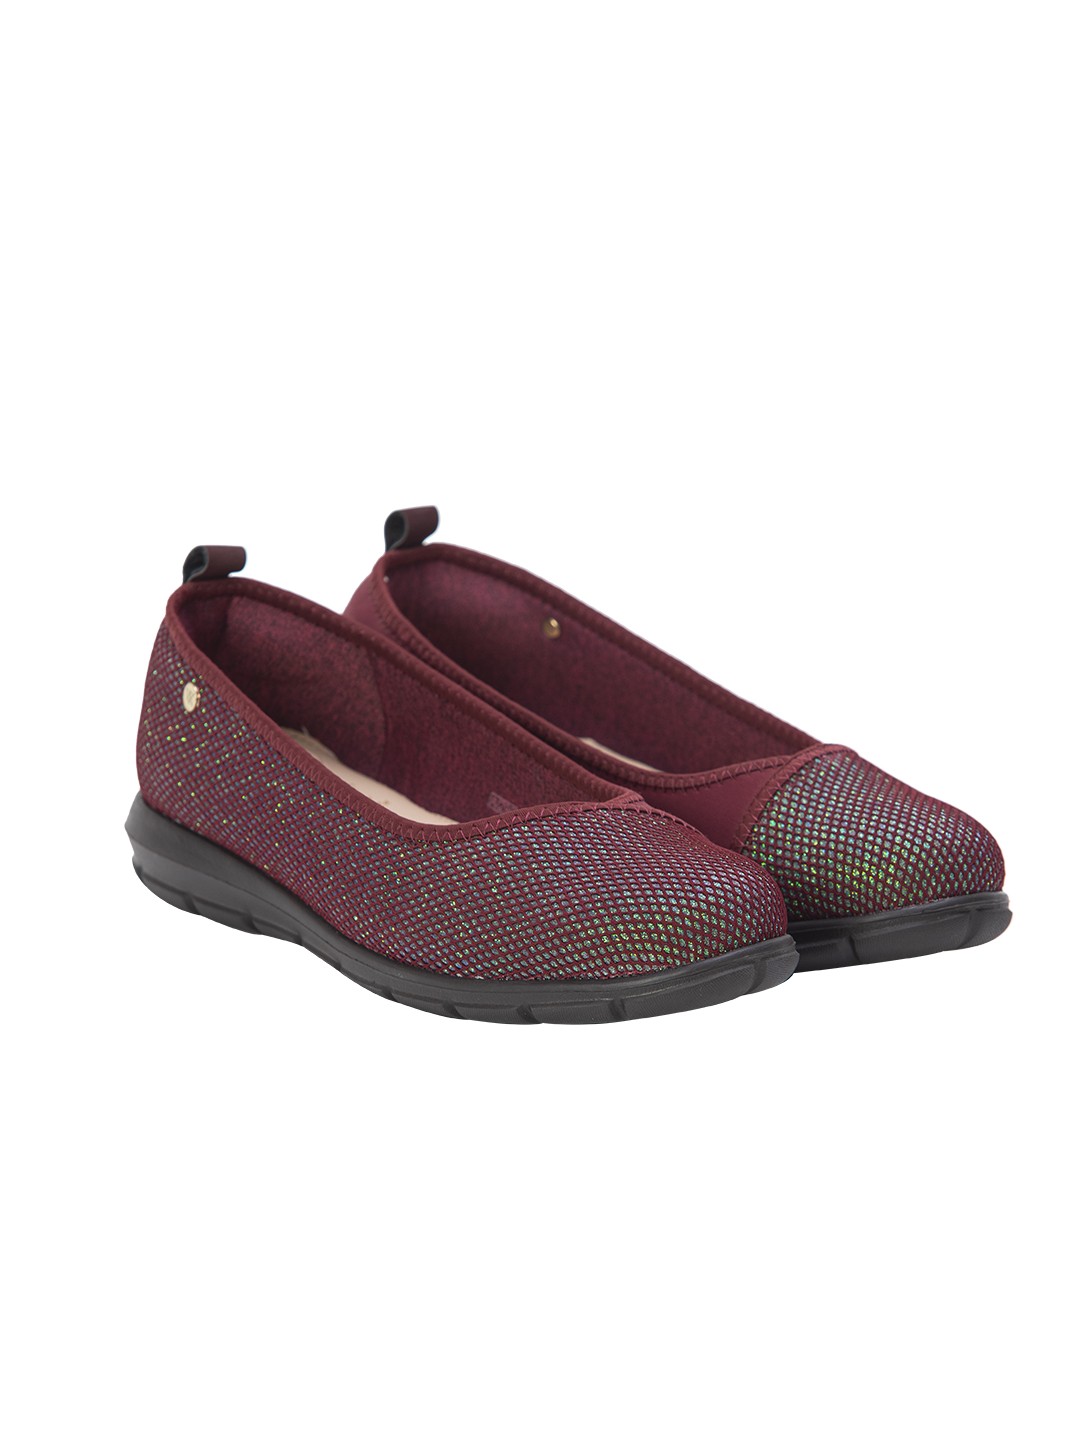 Buy Von Wellx Germany Comfort Pace Mehroon Casual Shoes Online in Kolkata